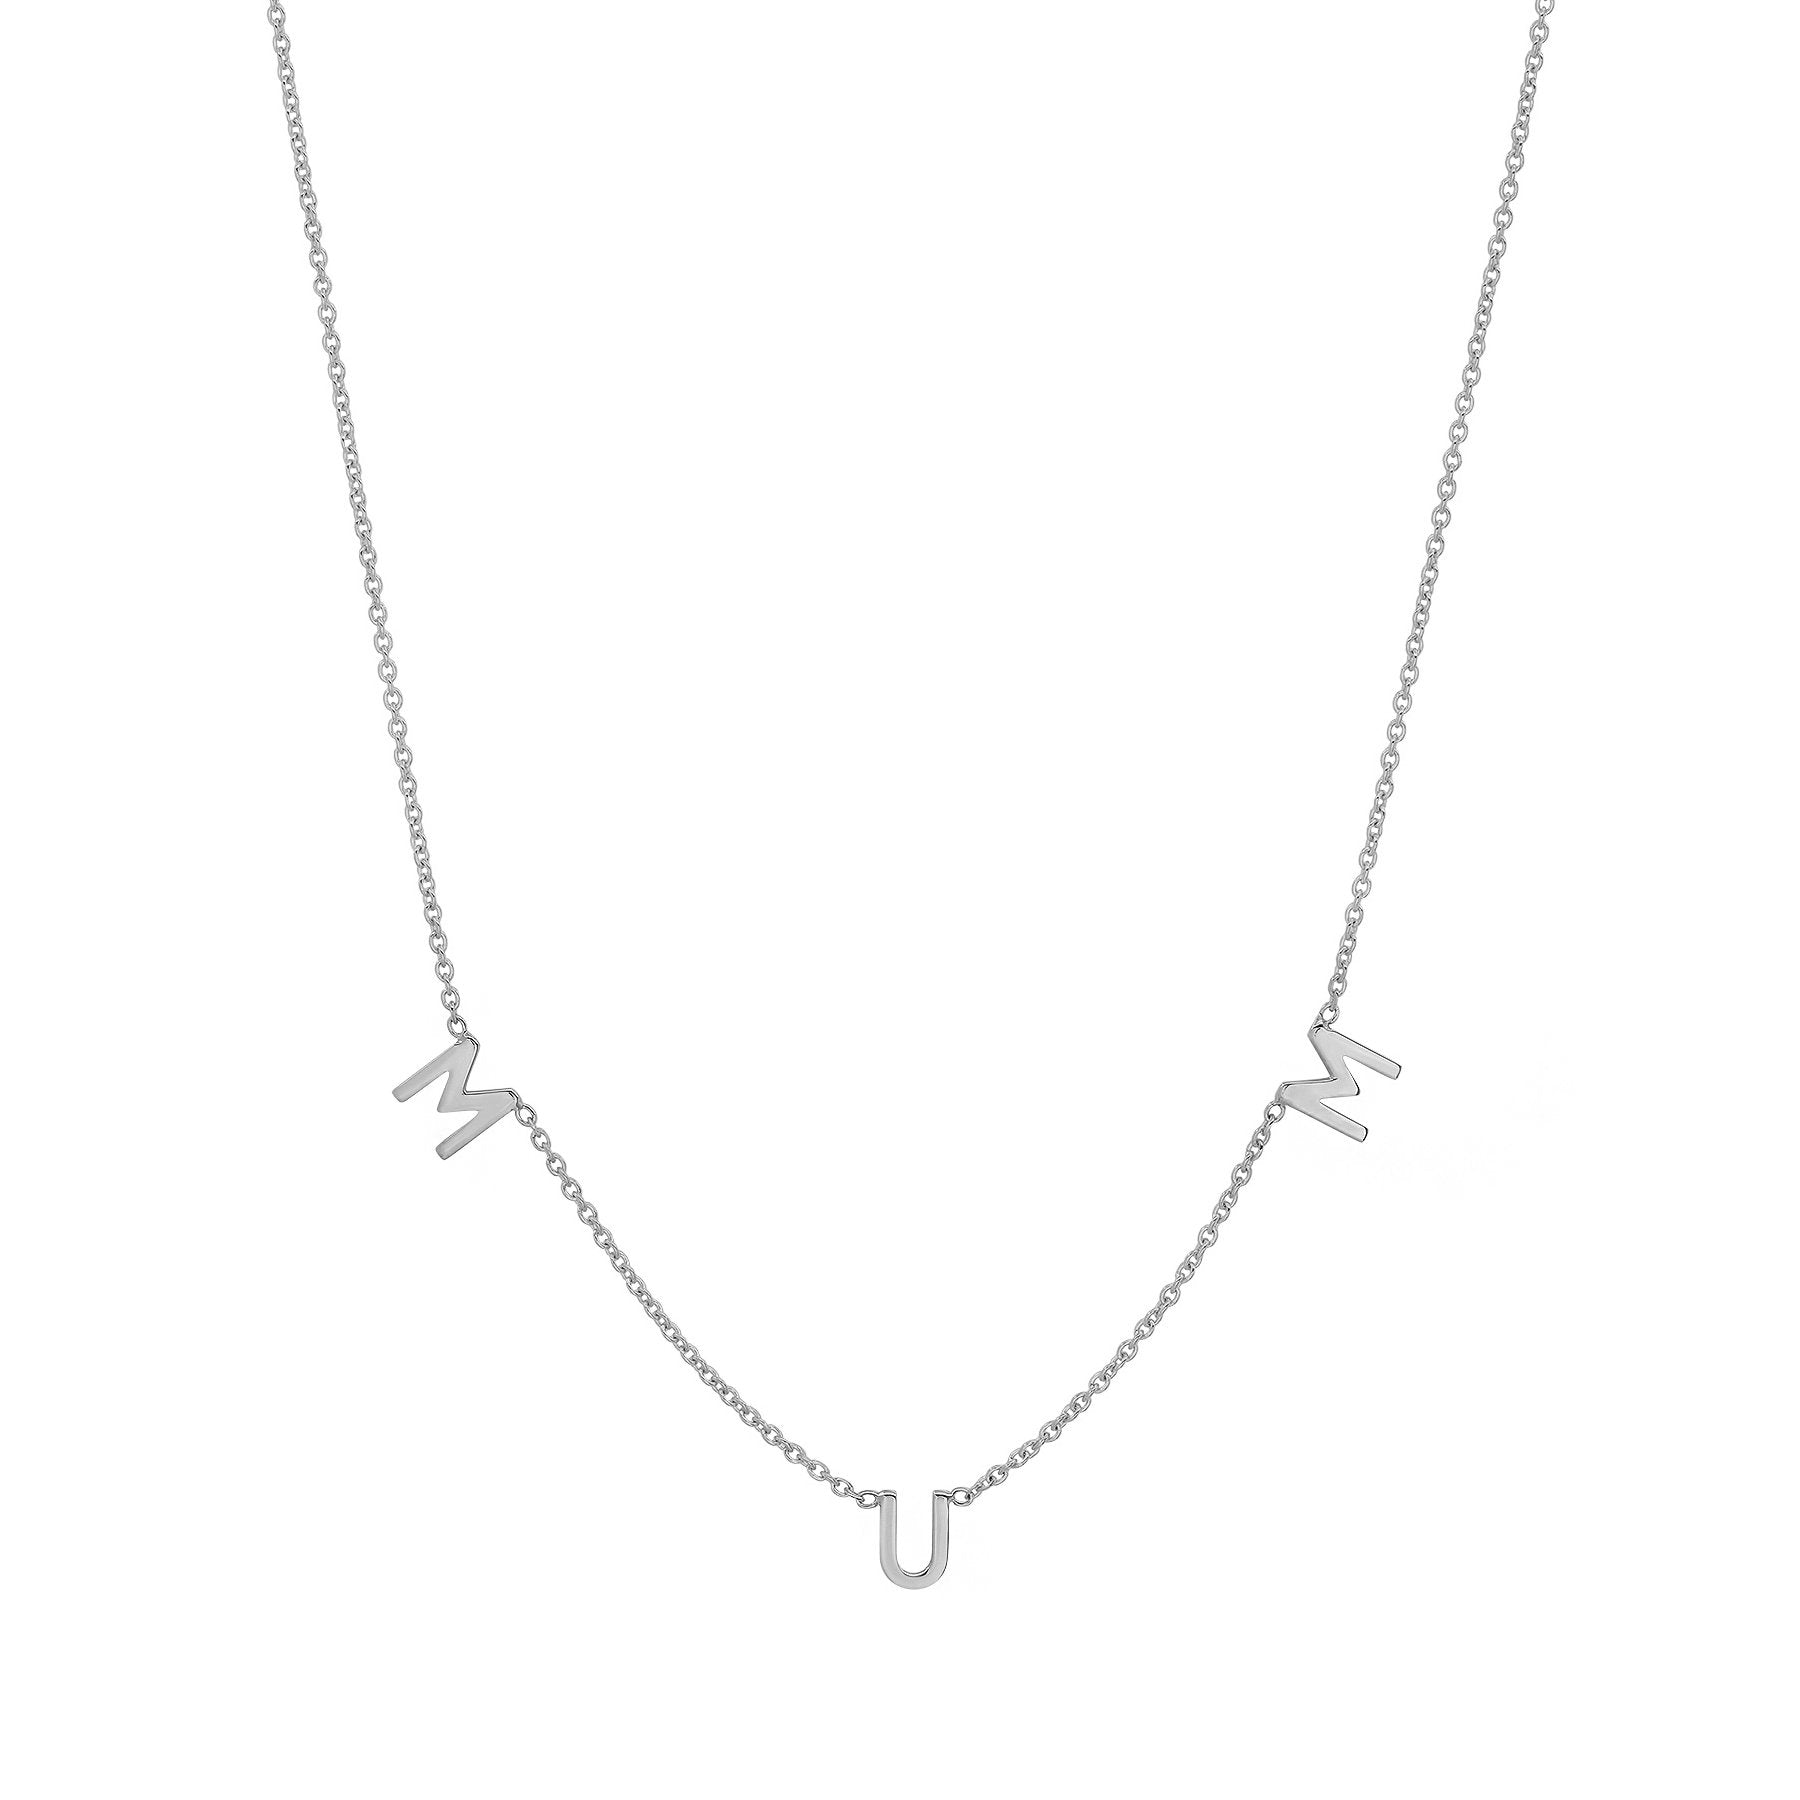 Basque Mum Necklace In Silver | MYER